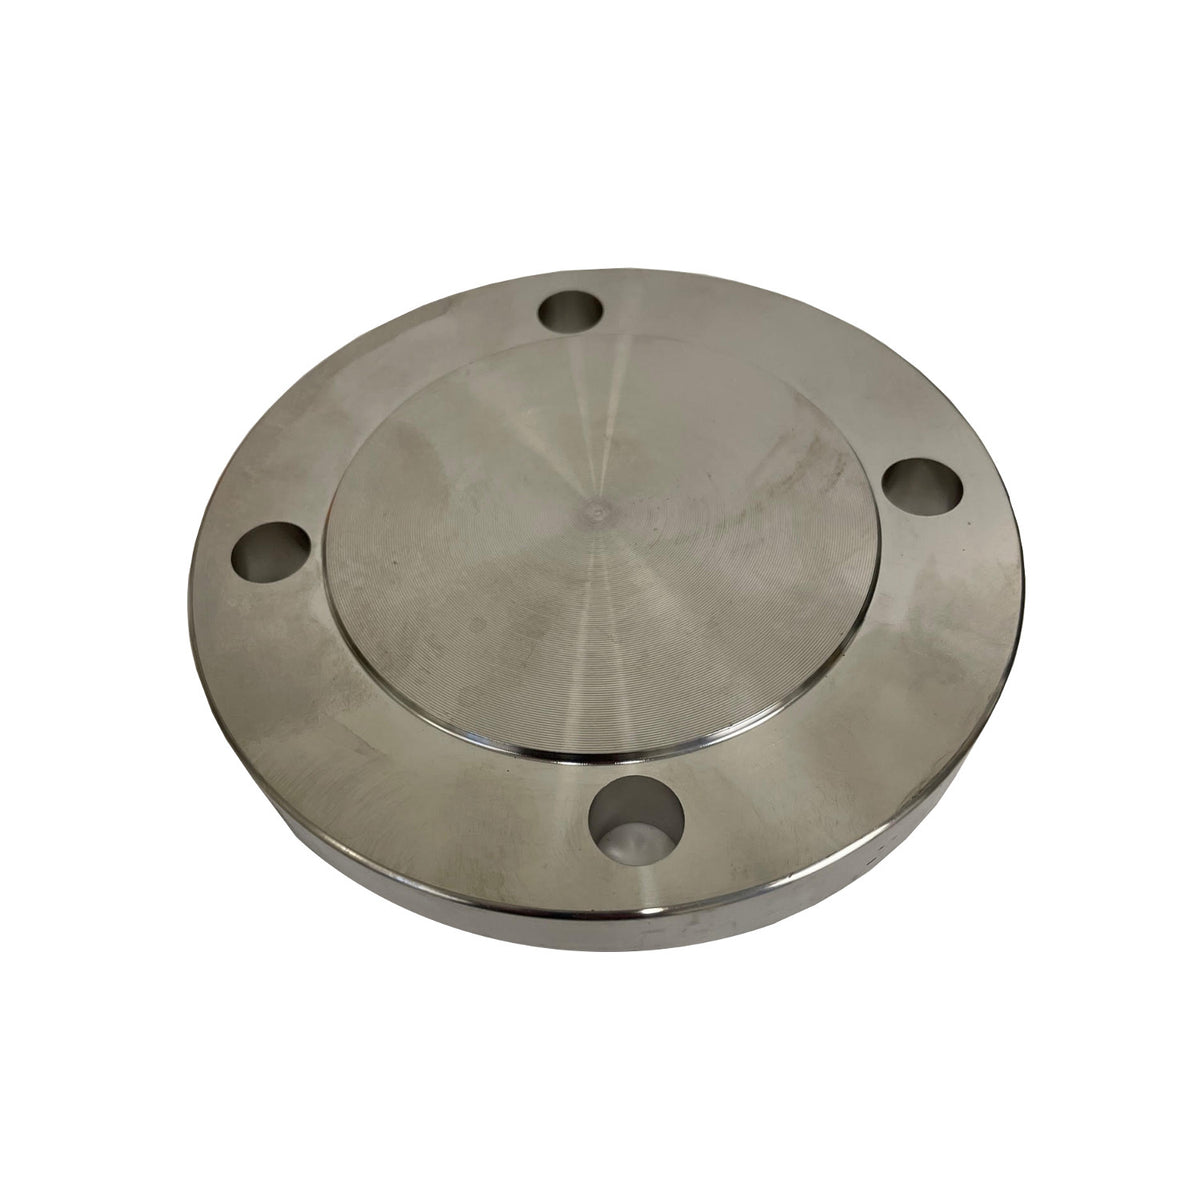 3 304 Stainless Steel Blind Flange Class 150 Prm Filtration 0424